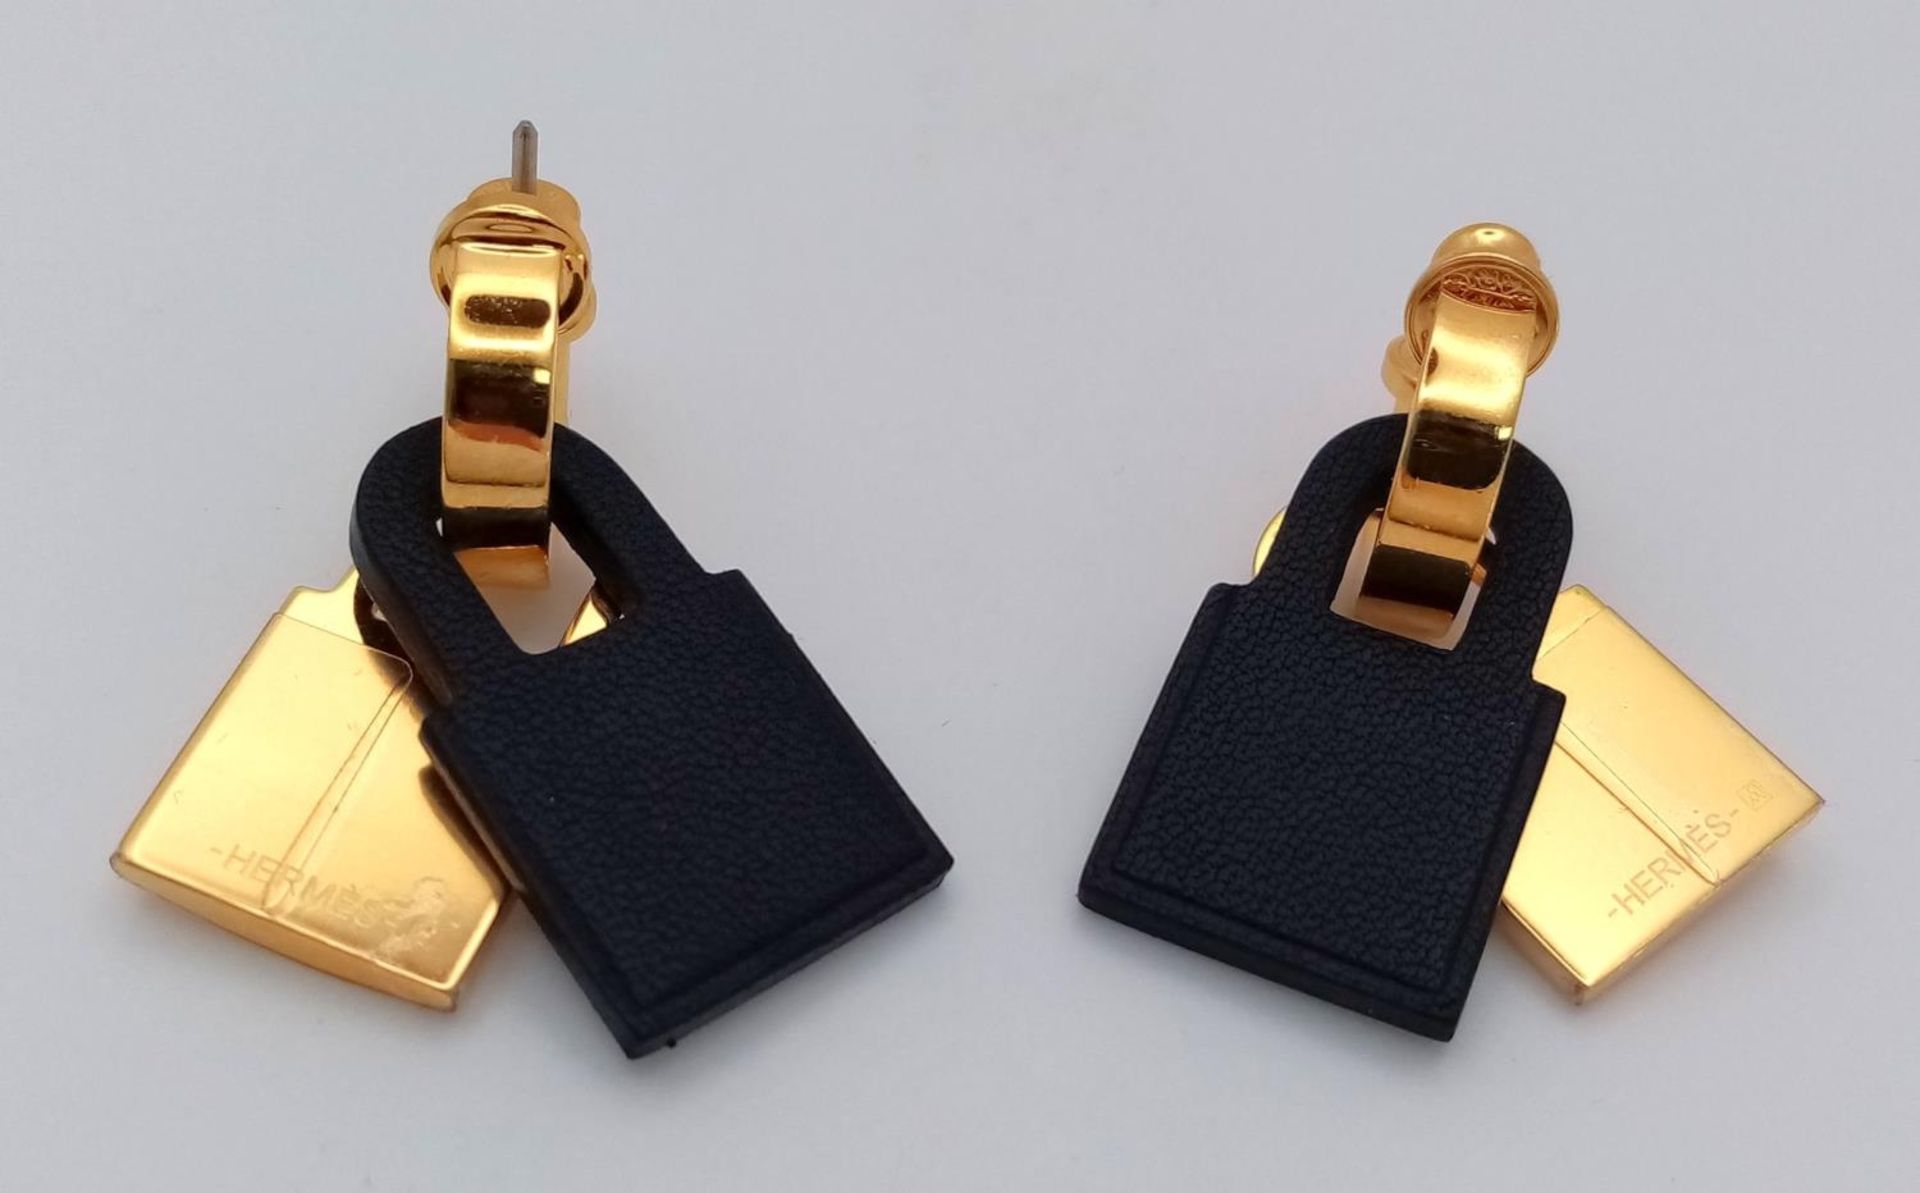 A Pair of Designer Gold Plated Hermes Padlock Earrings. Comes with original packaging. - Image 4 of 7